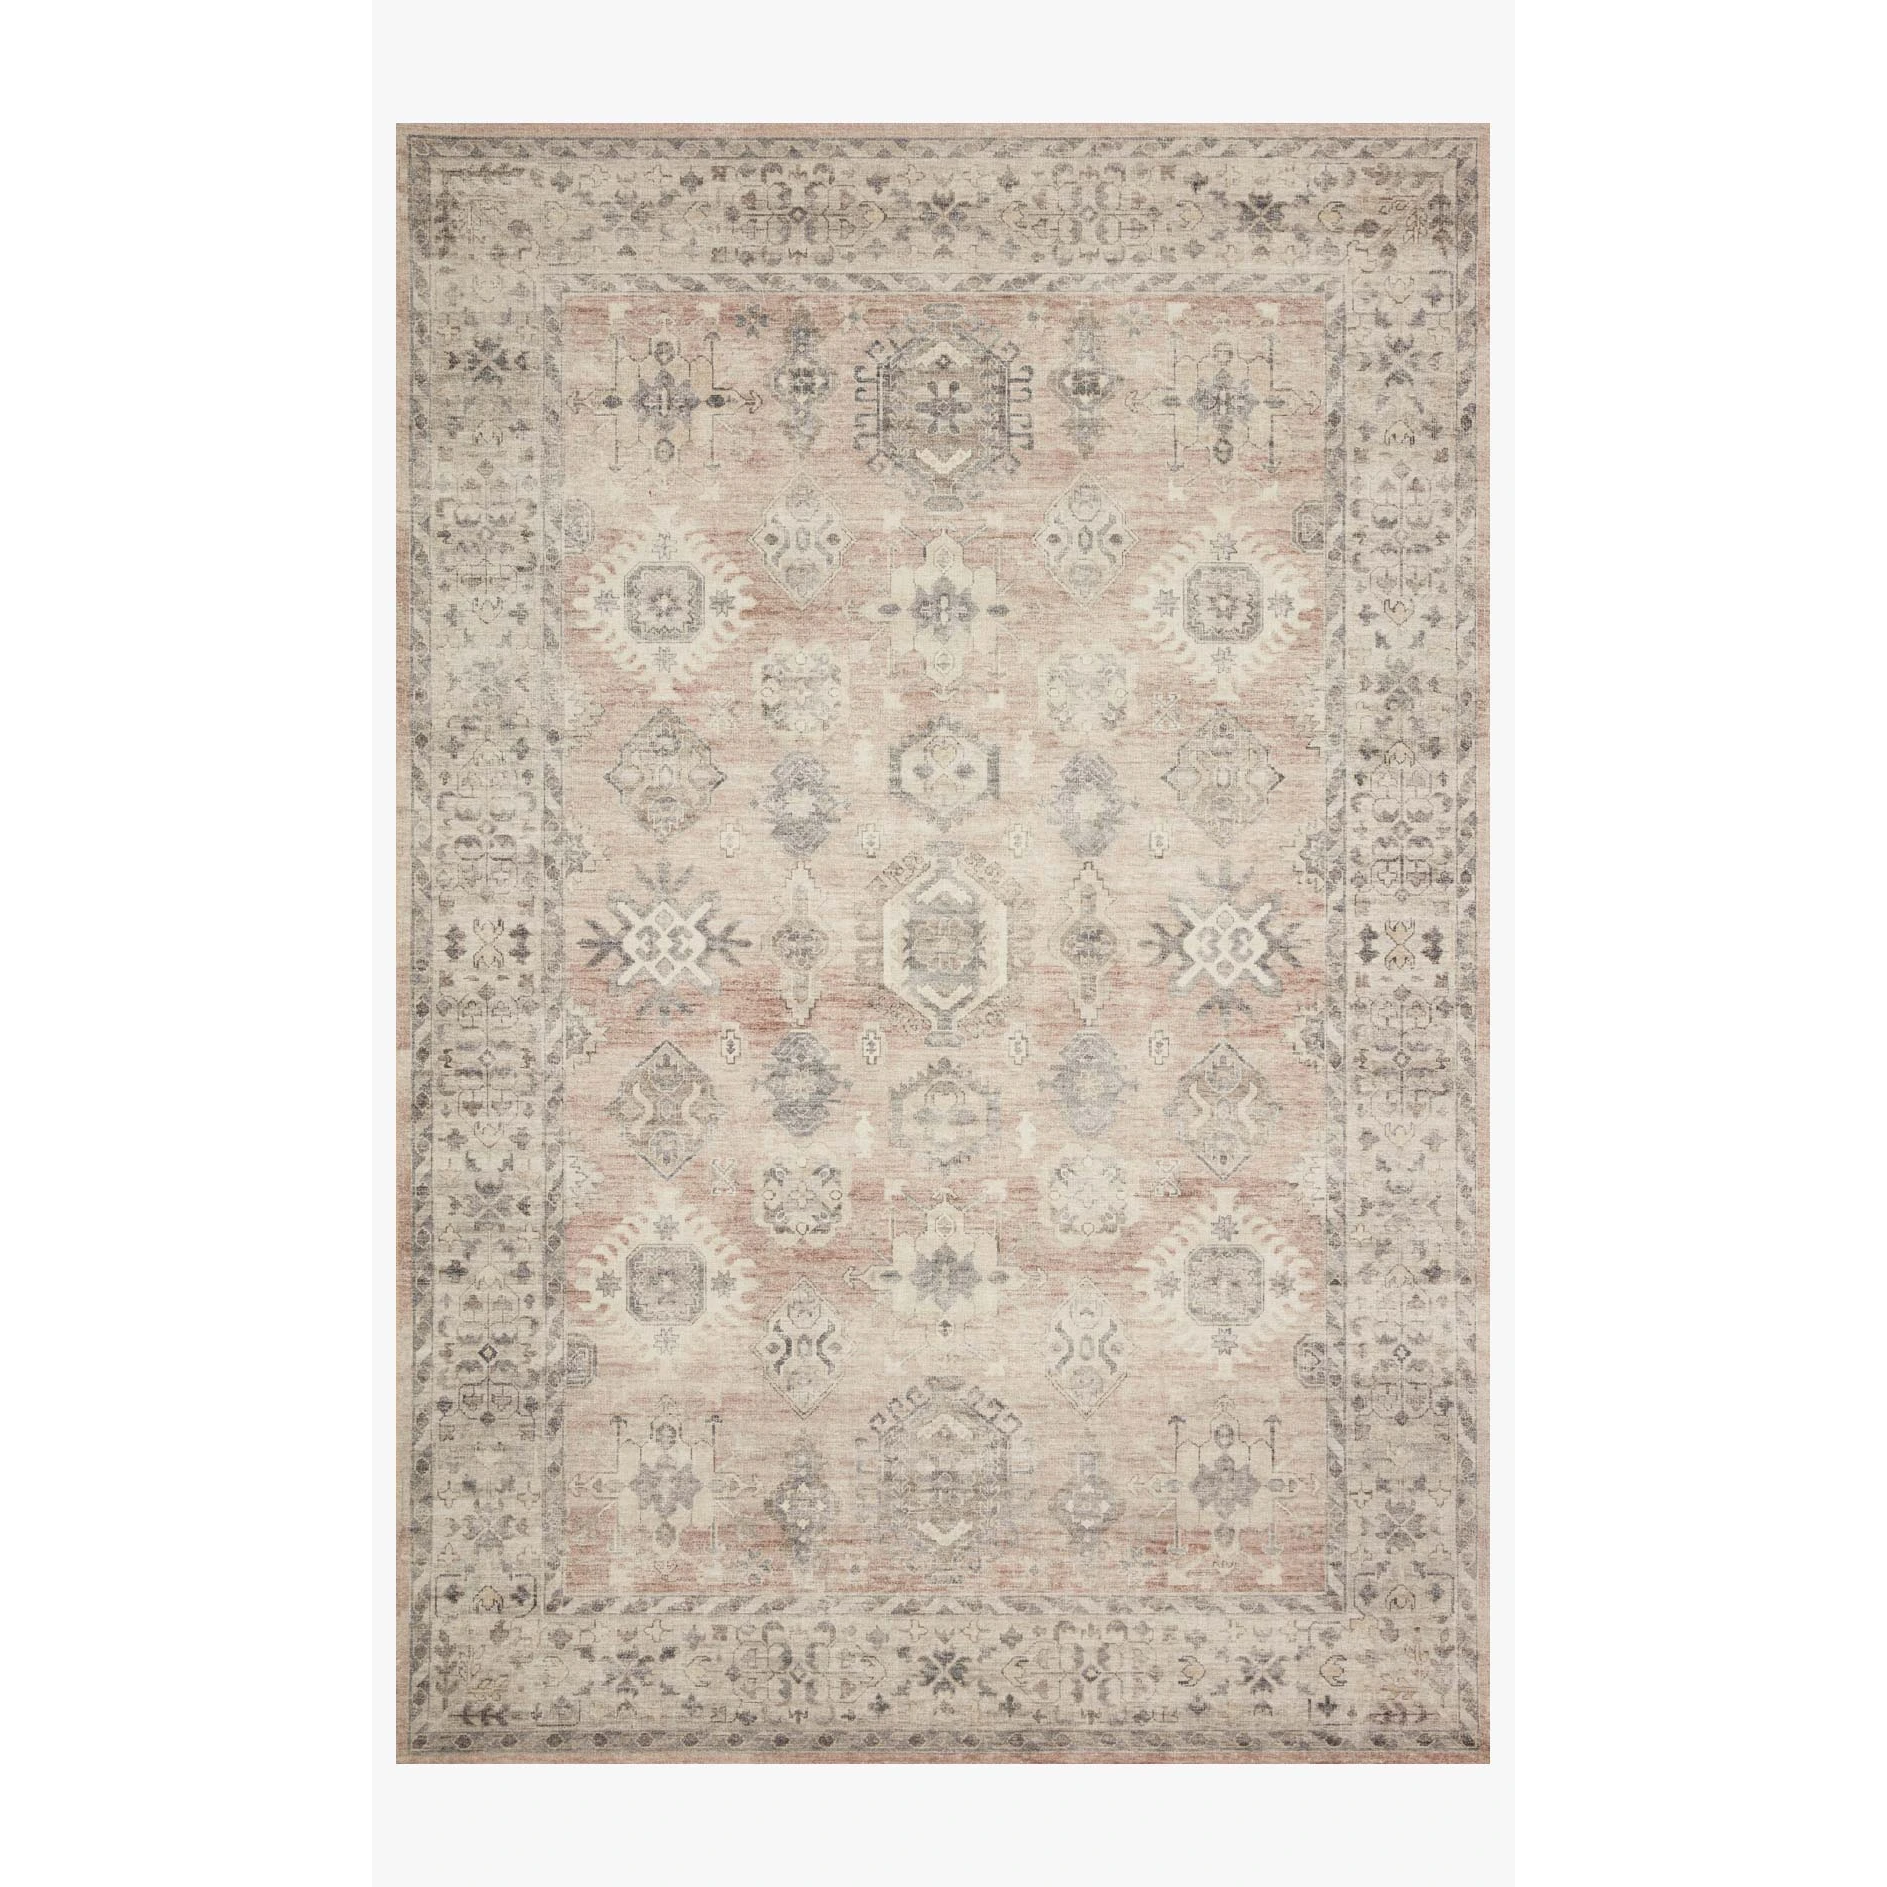 Hathaway Rug by Loloi - HTH-03 Java/Multi-Loloi Rugs-Blue Hand Home